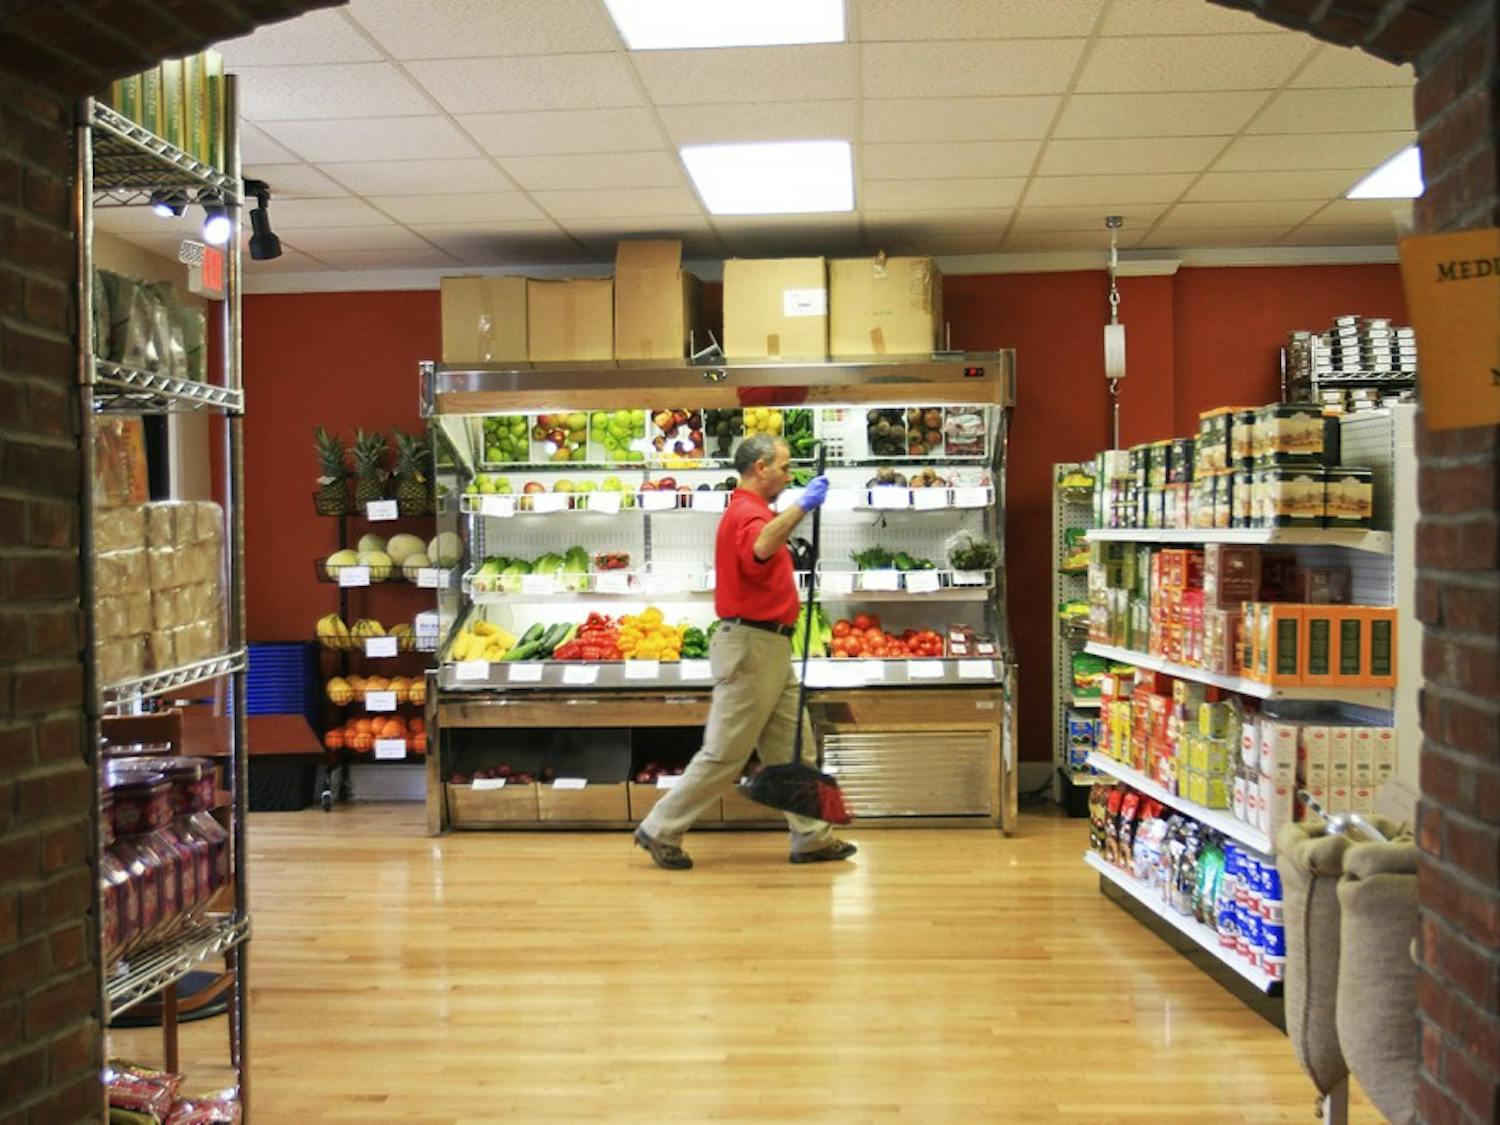 Mohamed Jamili tends to the newly opened Mediterranean Market located within Med Deli on West Franklin Street.